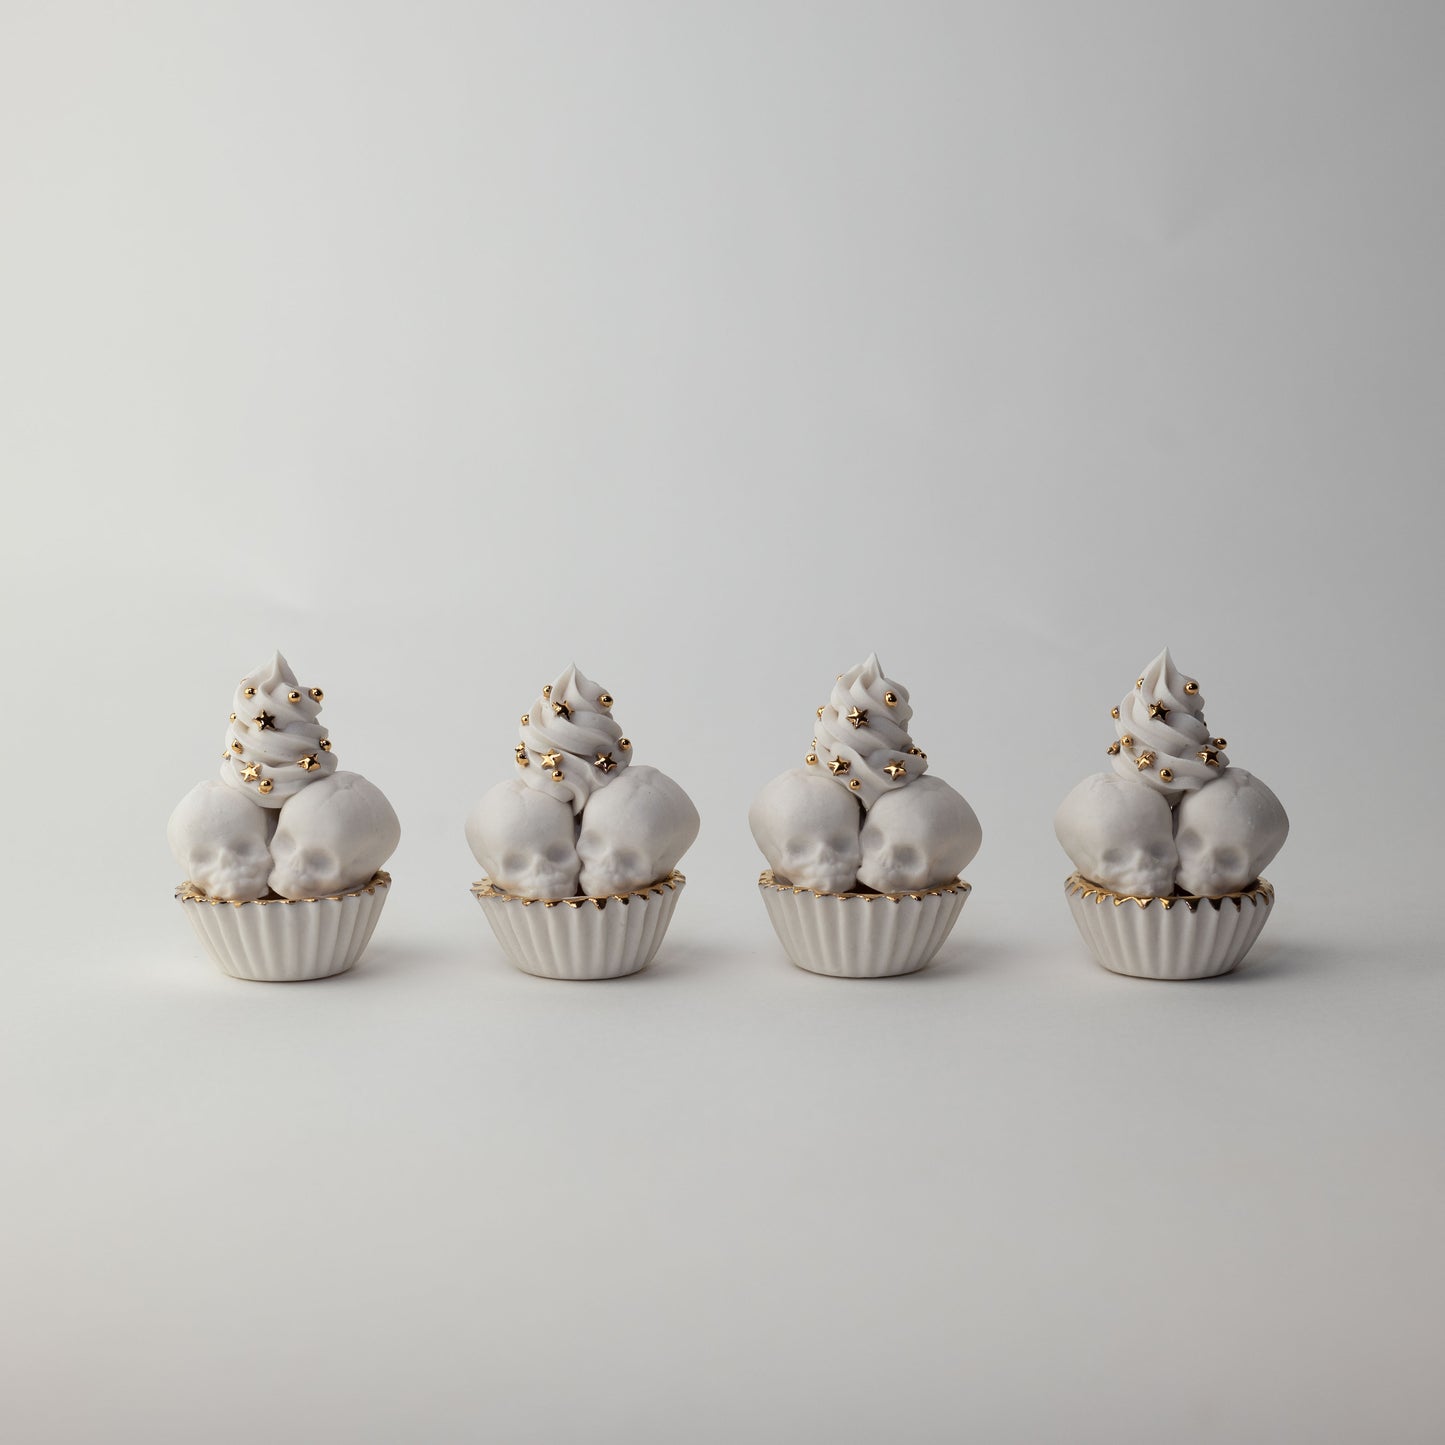 Gilded Twin Cupcake (Limited Edition Porcelain Sculpture)